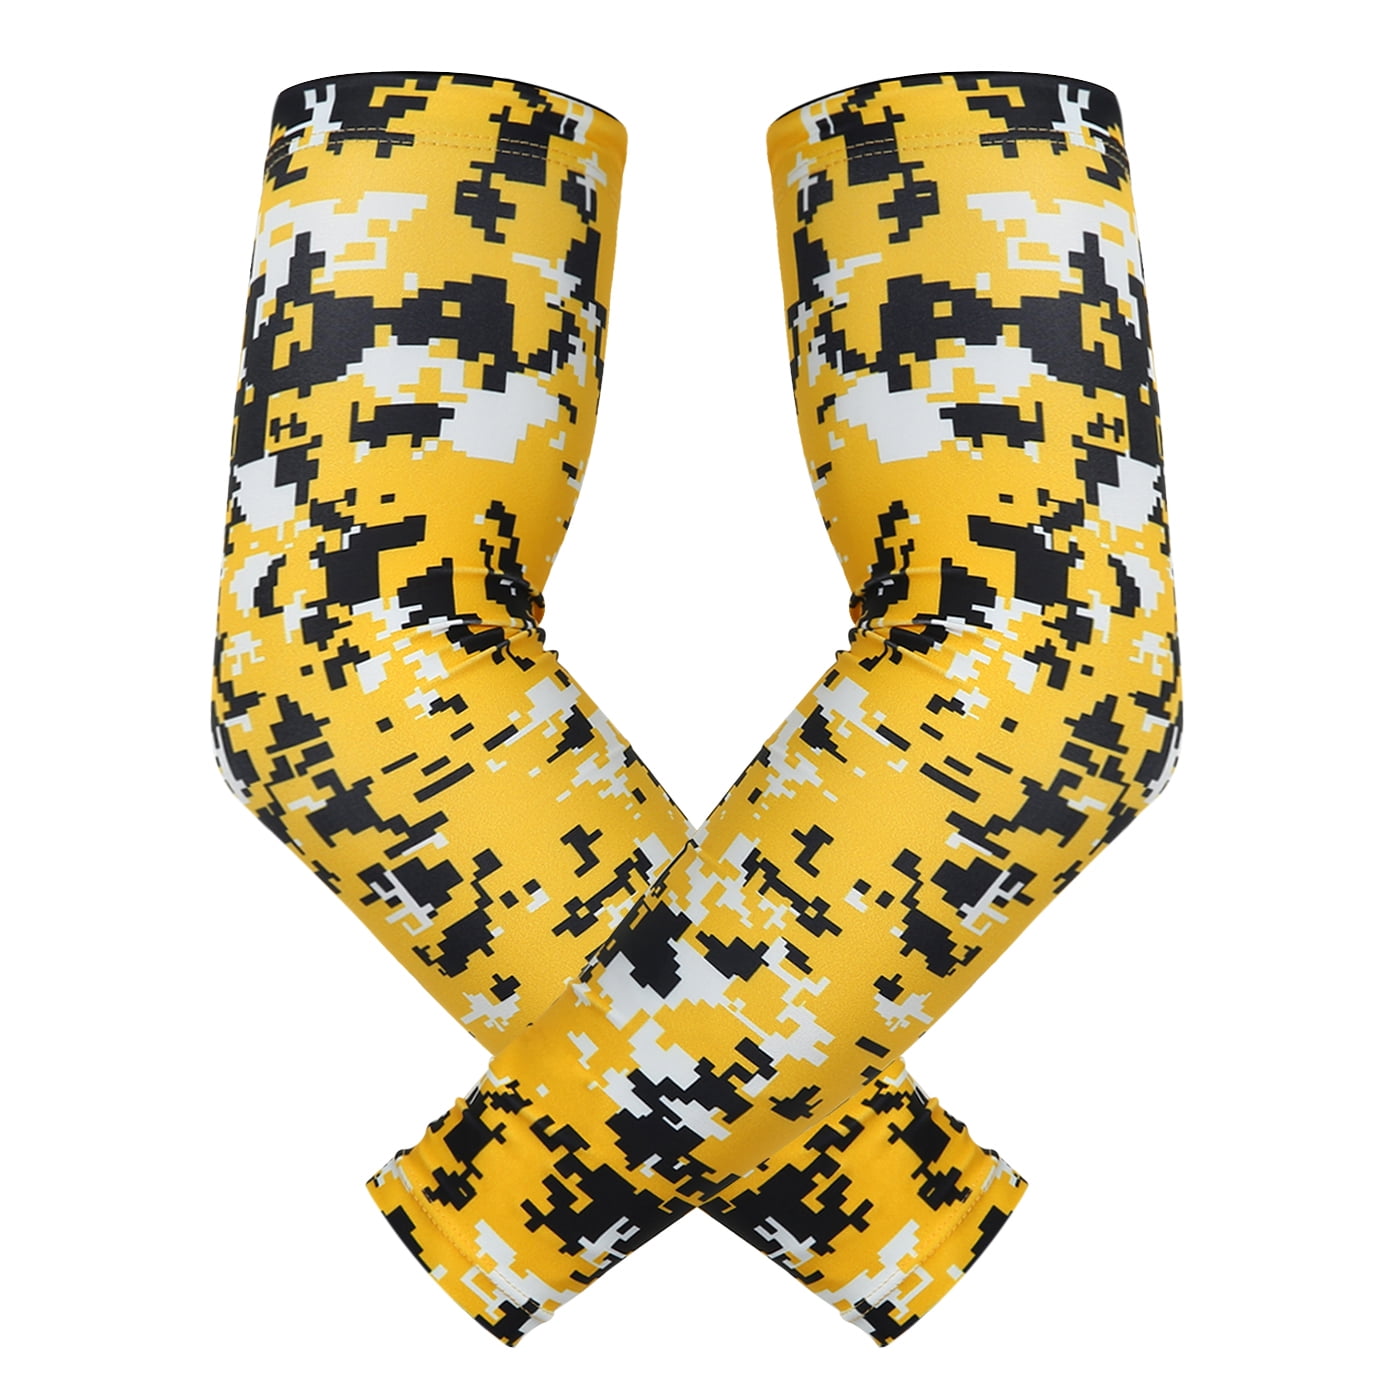 Boys & Girls Softball Yellow S/M For Men Football Youth Women B-Driven Sports Athletic Sports Arm Compression Sleeve Great For Baseball 